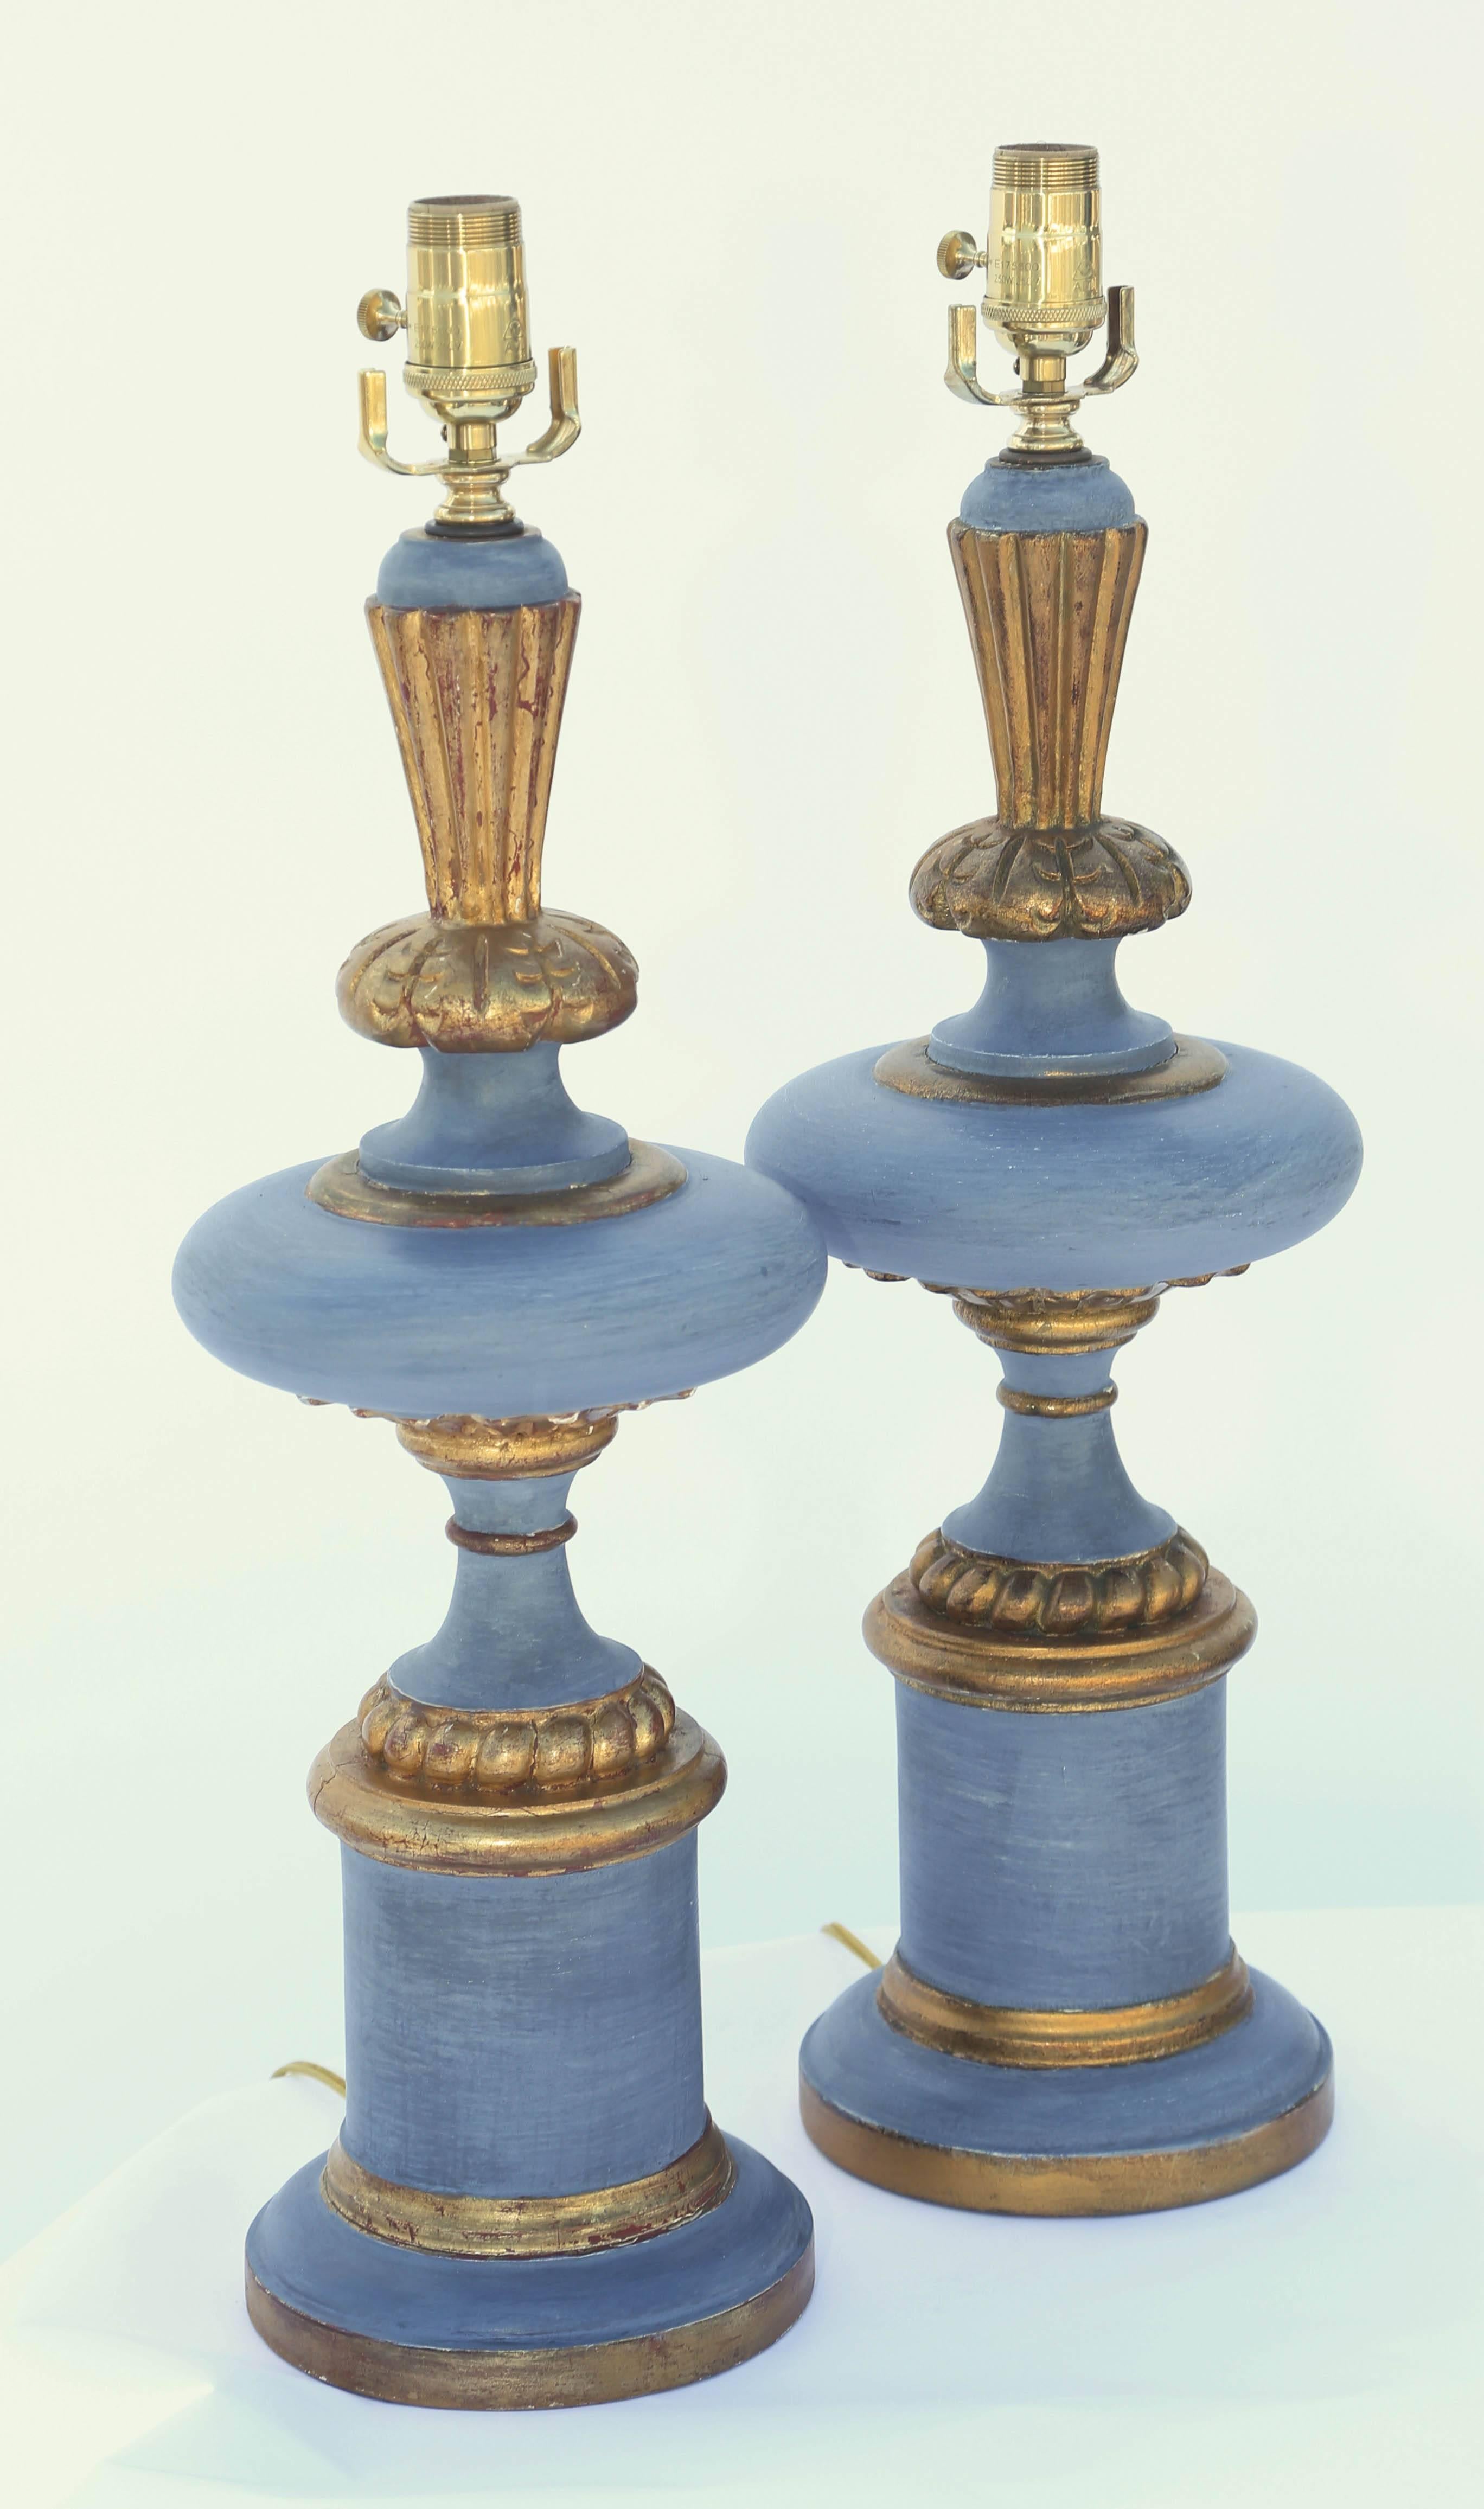 Pair of painted table lamps, with parcel-gilt accents, its turned, disk-form body surmounted by flared finial, on round foot and graduated plinth.

Stock ID: D9441